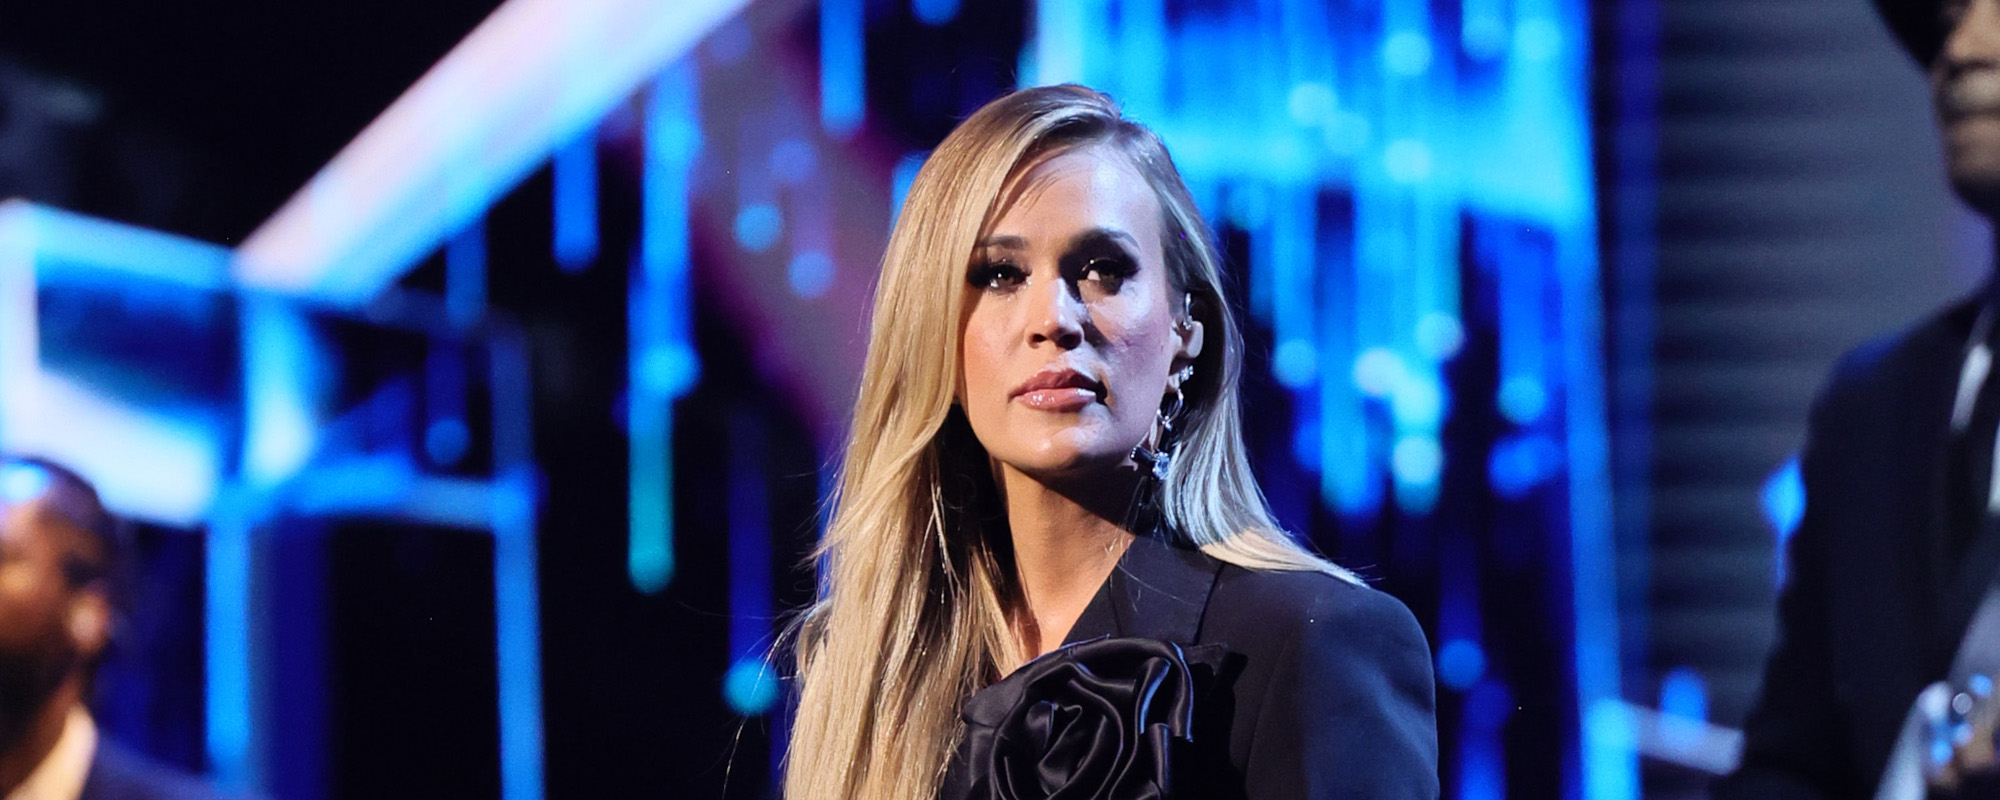 Was Carrie Underwood Snubbed at the 2023 CMA Awards? Her Fans Say Yes